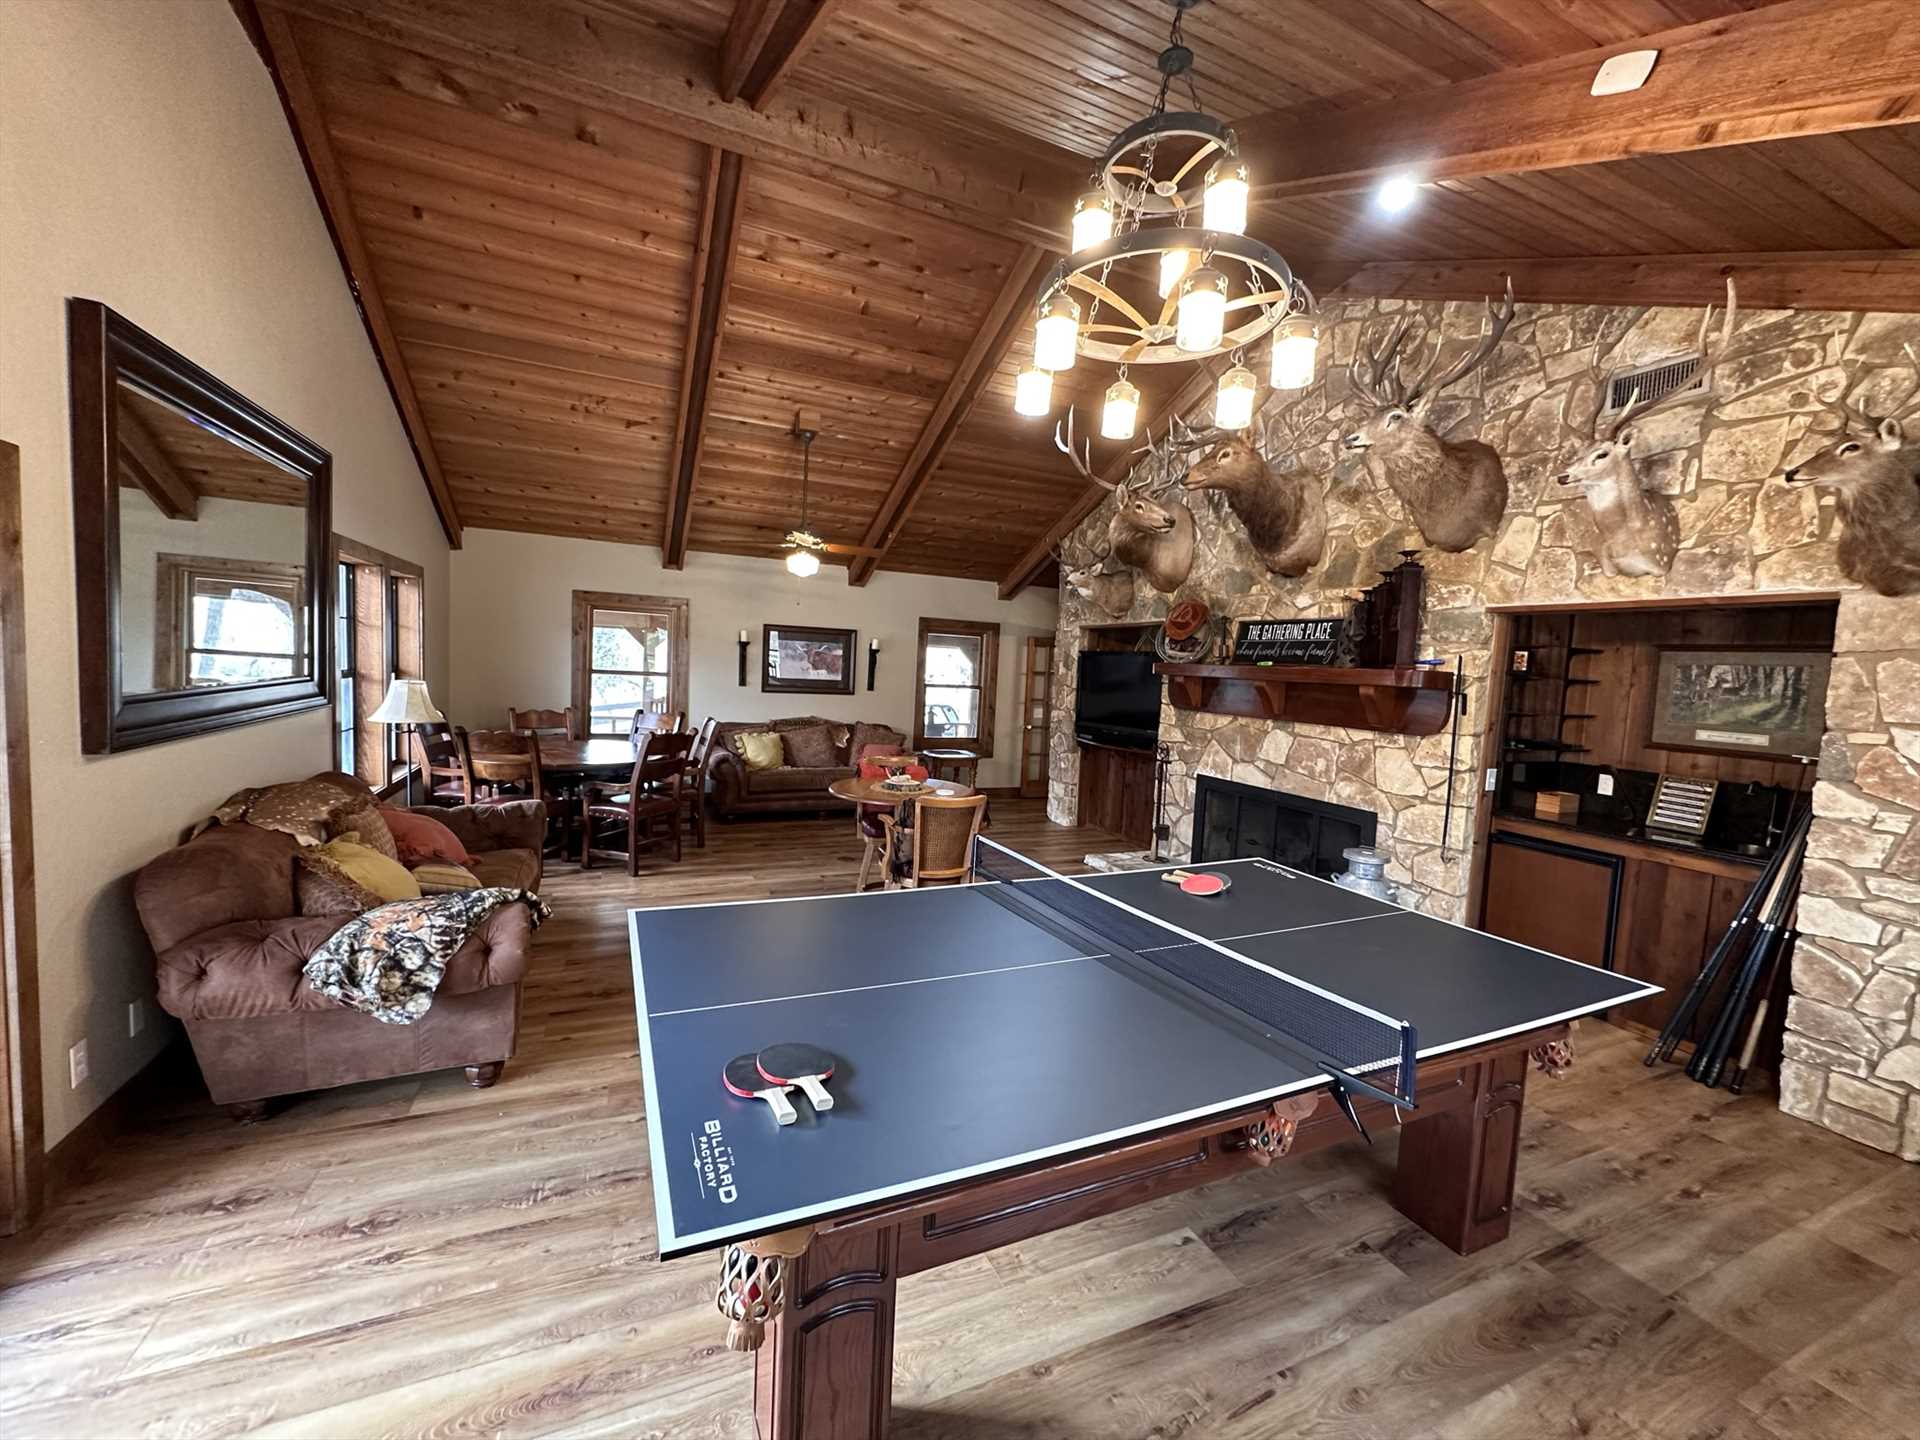                                                 A ping pong table is just one of the fun extras you'll find in the den/game room at the Lodge at Forse Mountain Ranch!